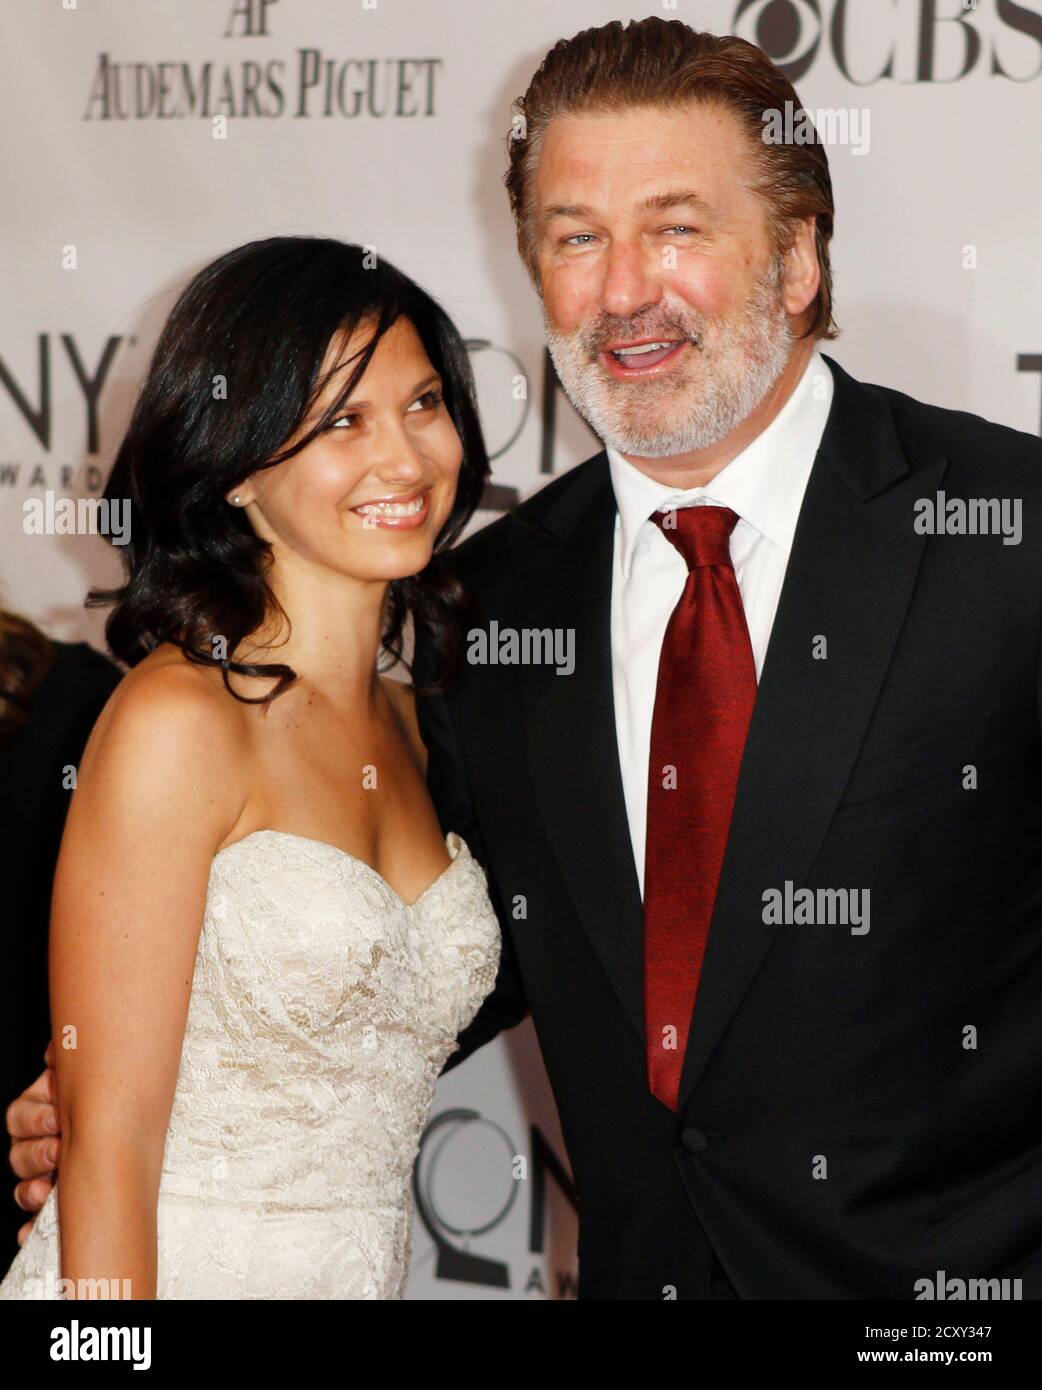 Actor Alec Baldwin and his guest arrive for the American Theatre Wing's 65th annual Tony Awards ceremony in New York, June 12, 2011. REUTERS/Lucas Jackson (UNITED STATES - Tags: ENTERTAINMENT) Stock Photo